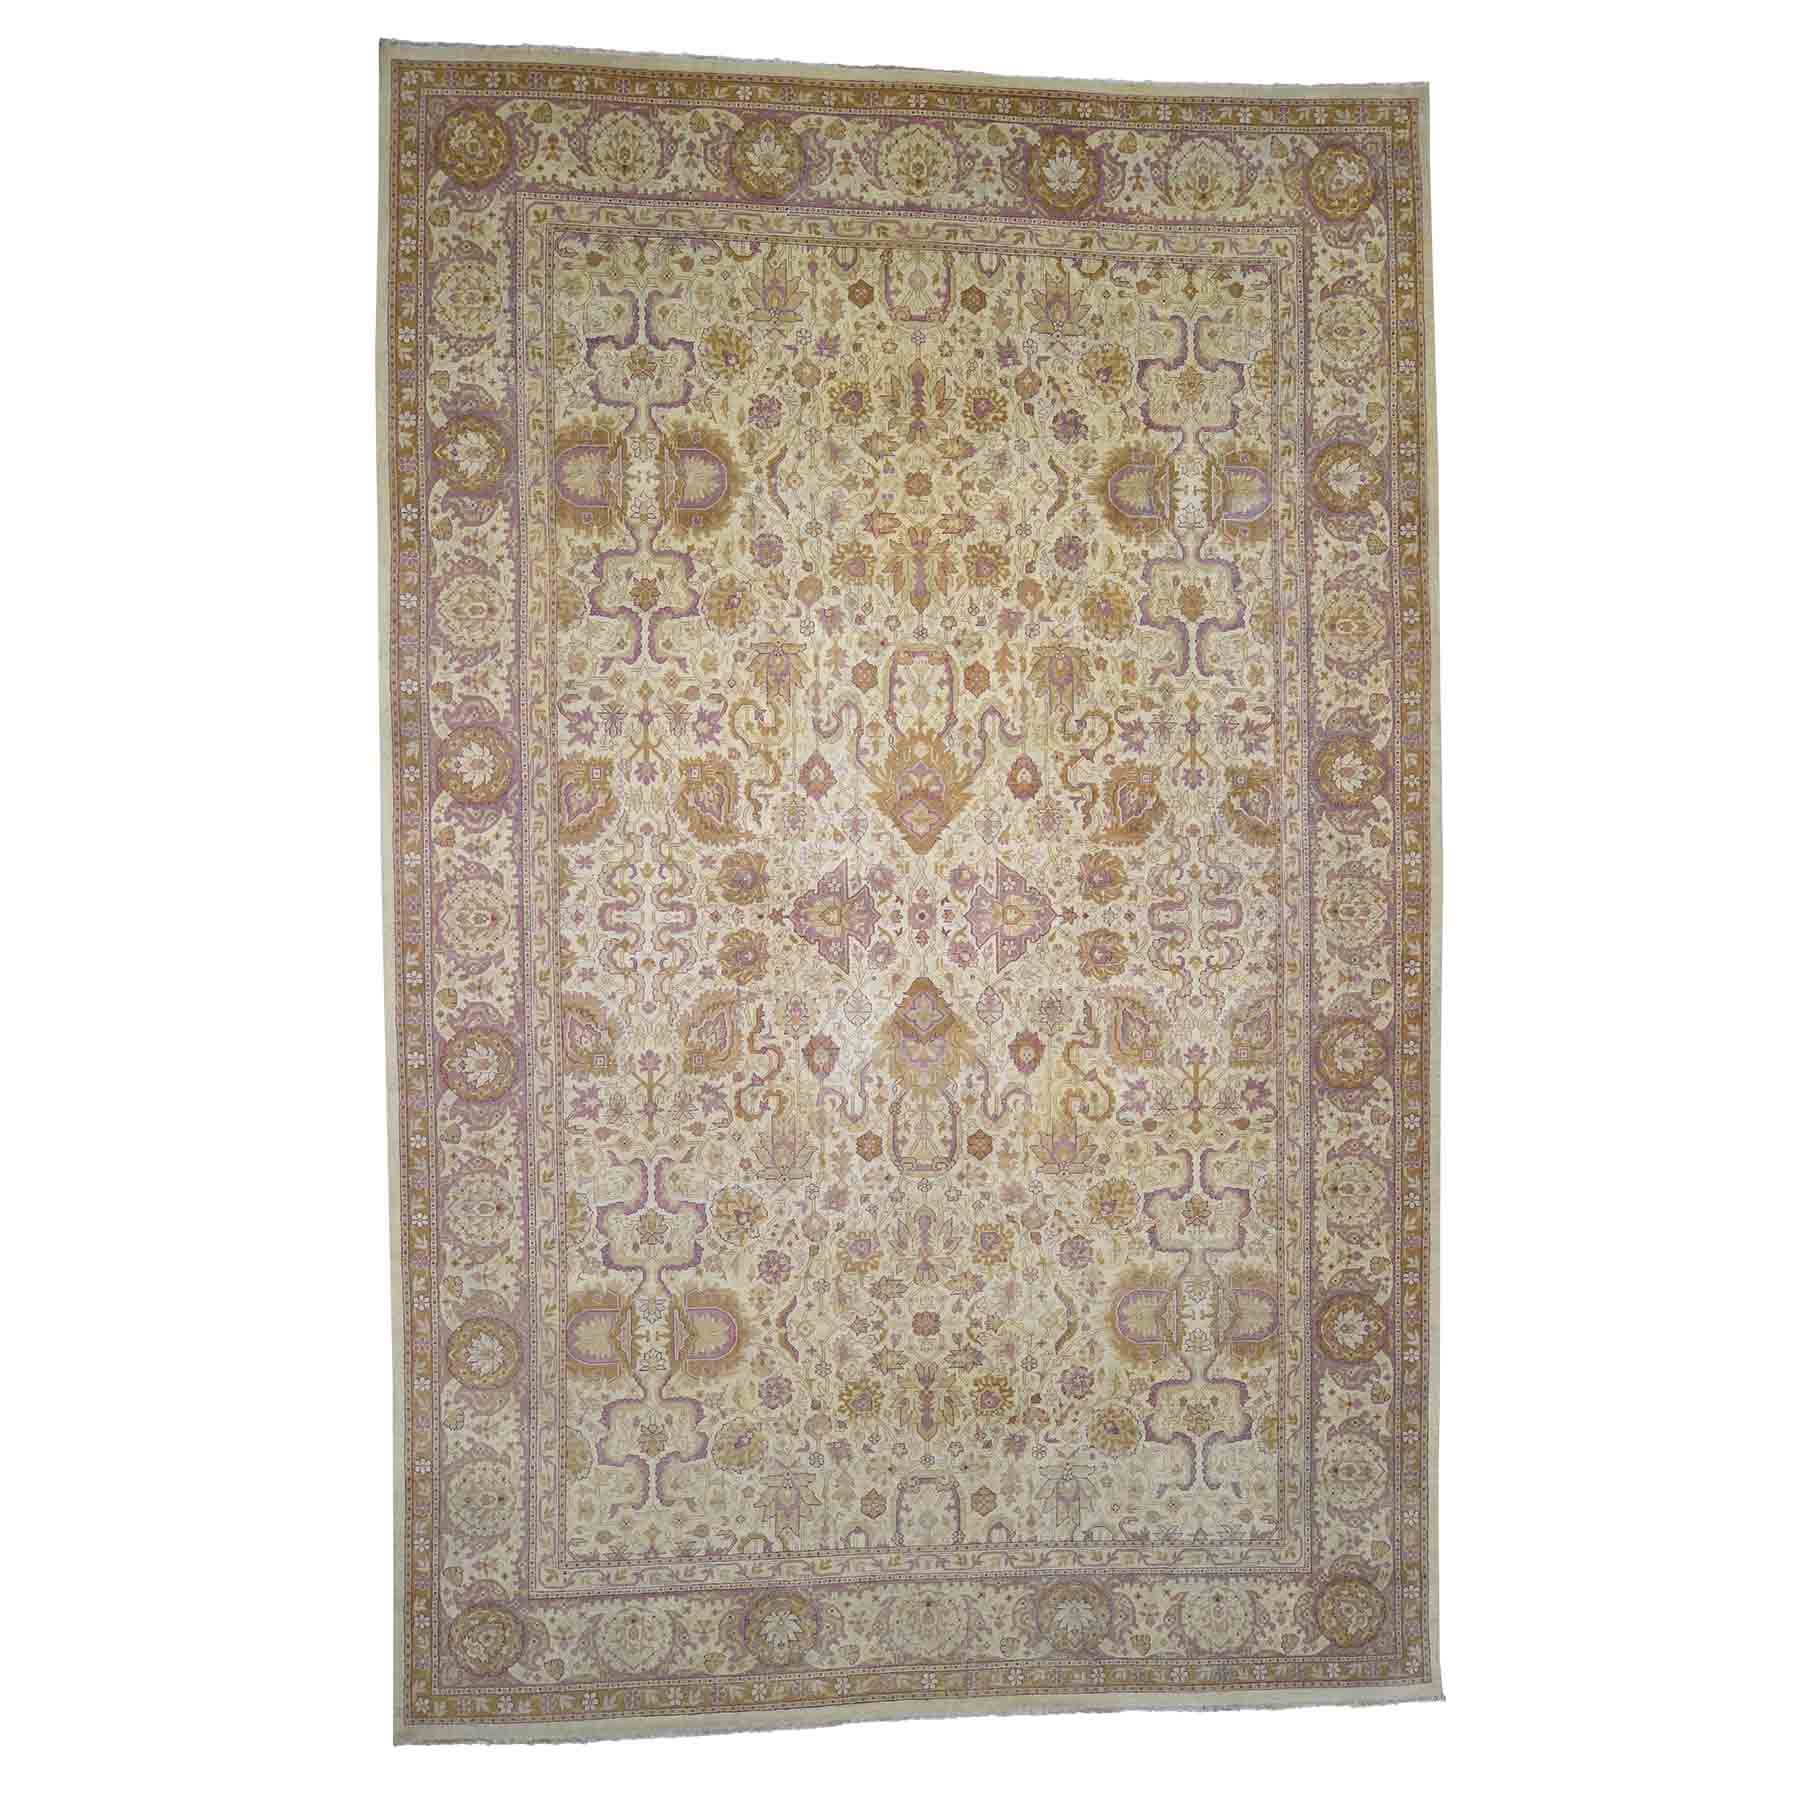 10'7"x16'4" Antique Mughal Amritsar Good Condition Even Wear Hand Woven Oriental Oversize Rug 